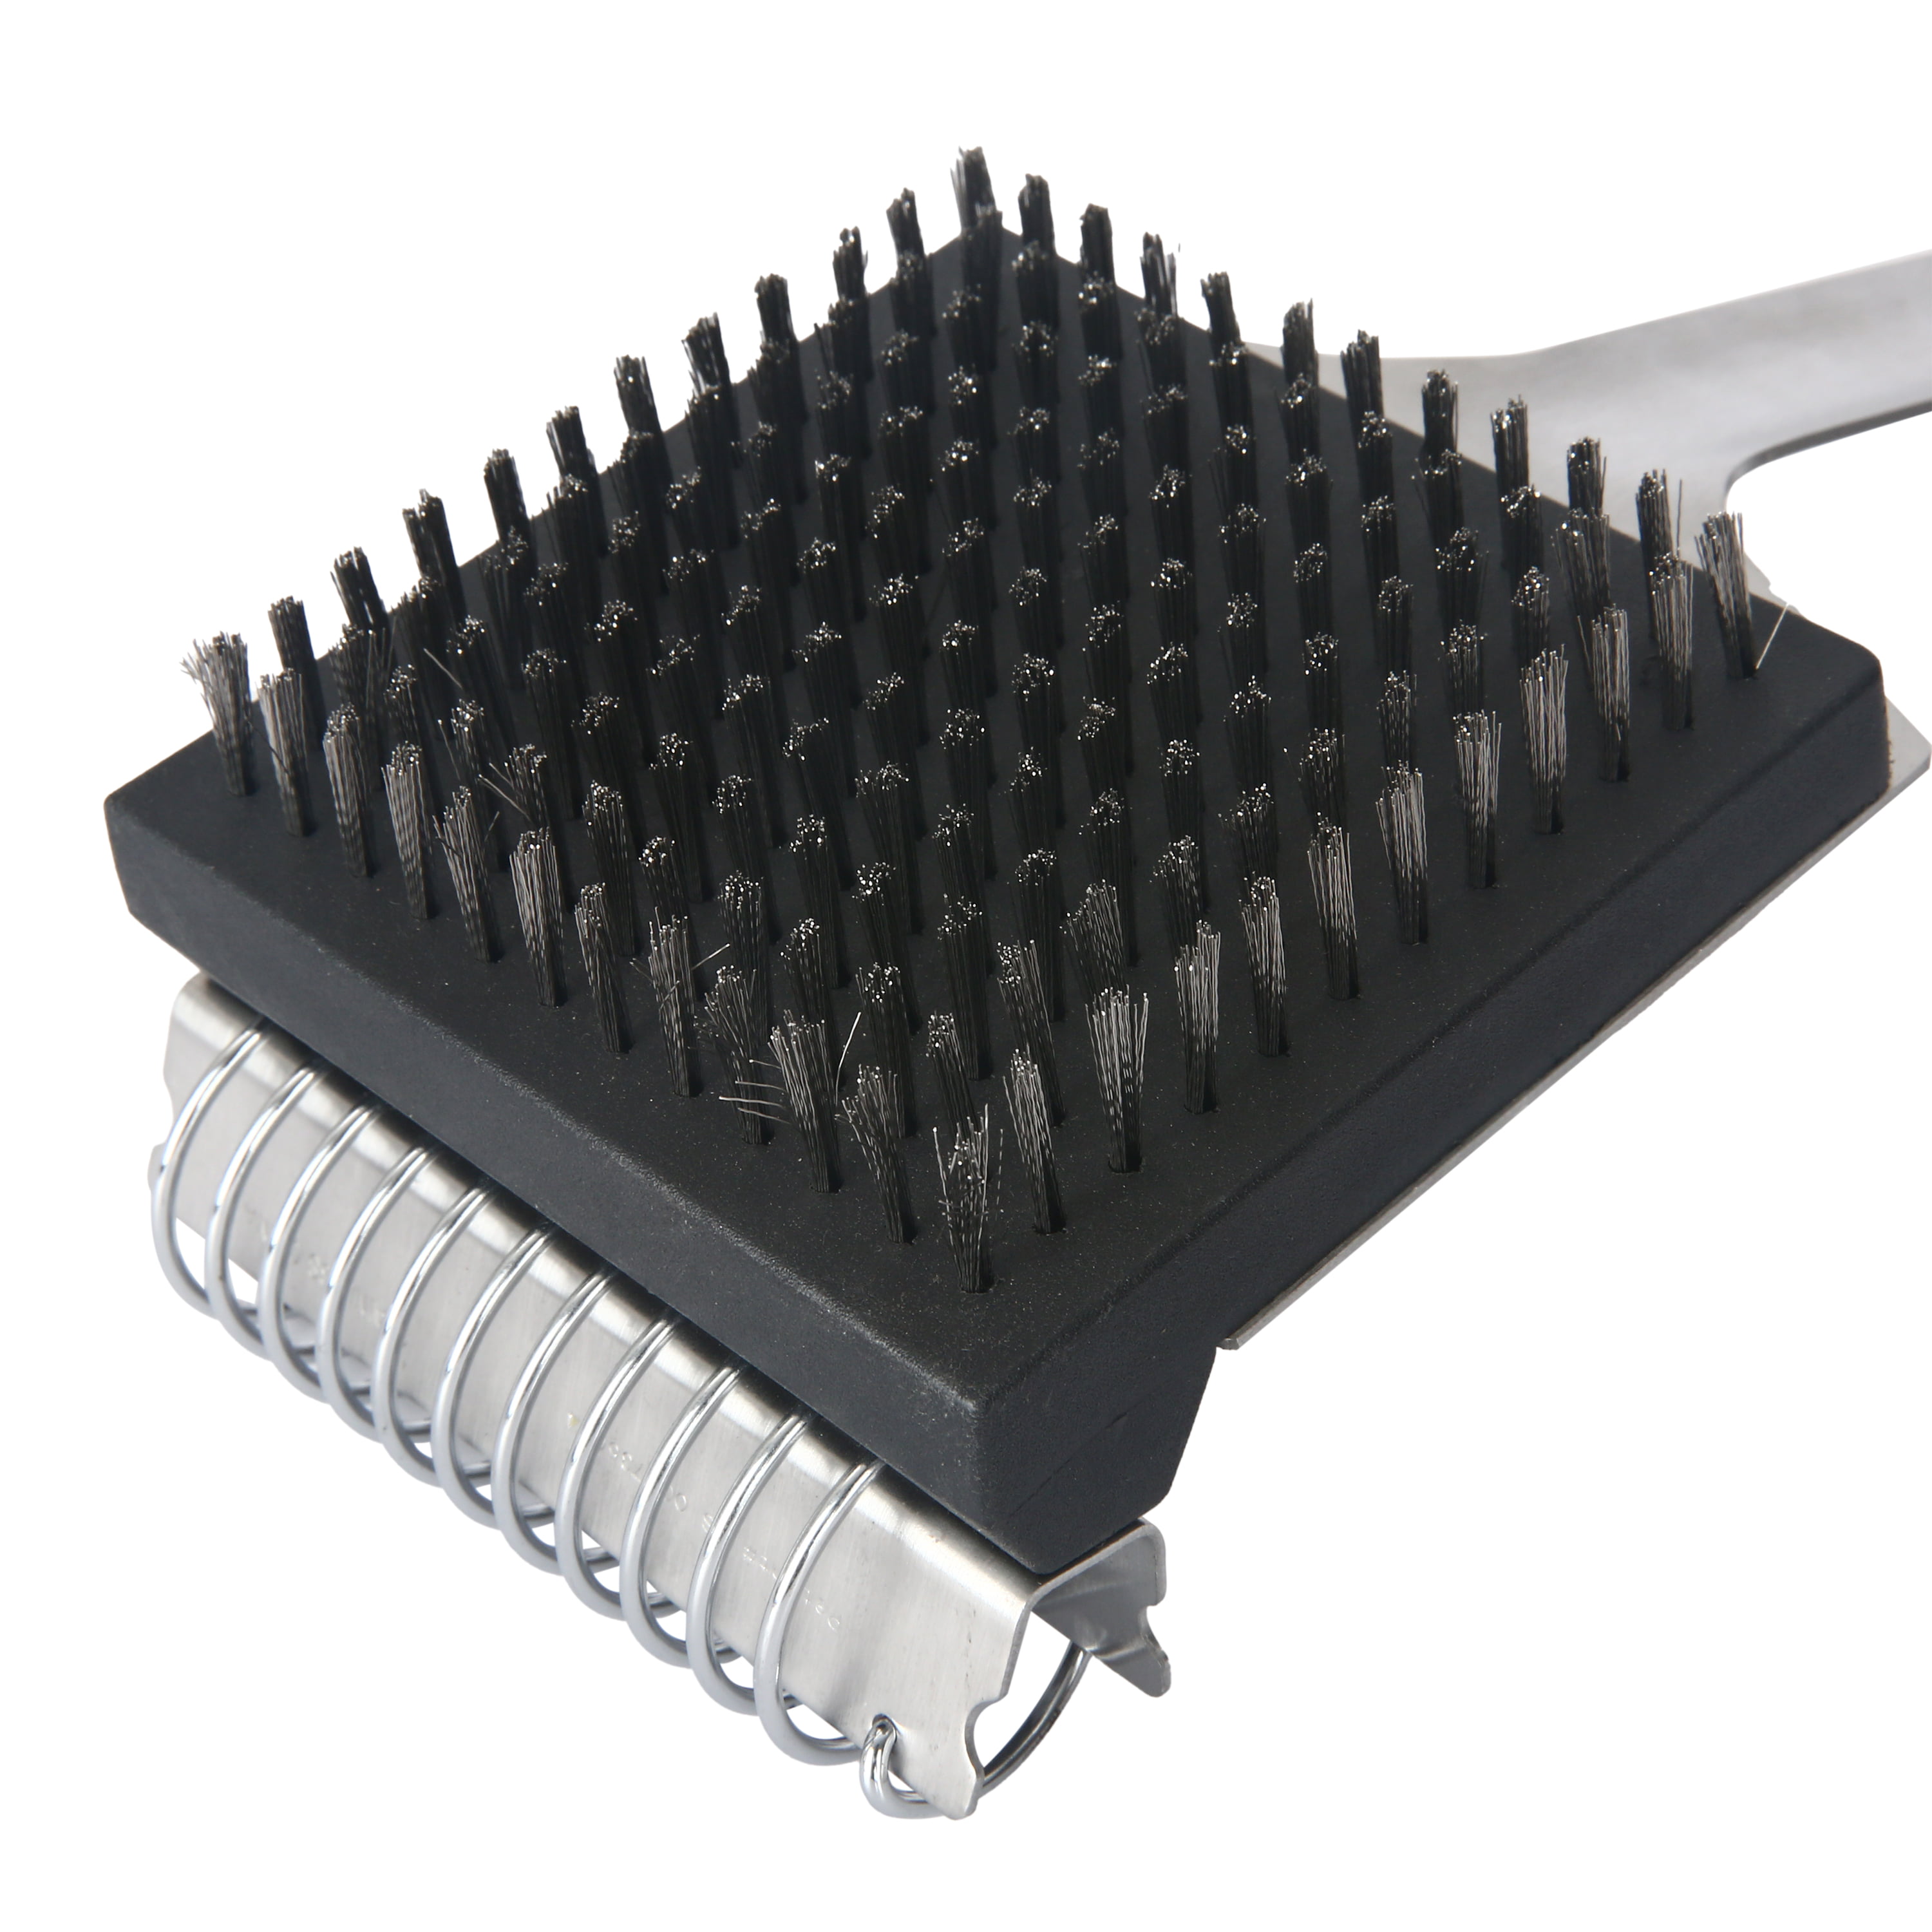 Grill Brush and Scraper, Wire BBQ Grill Brush for Outdoor Grill, 16.5” Grill  Cle